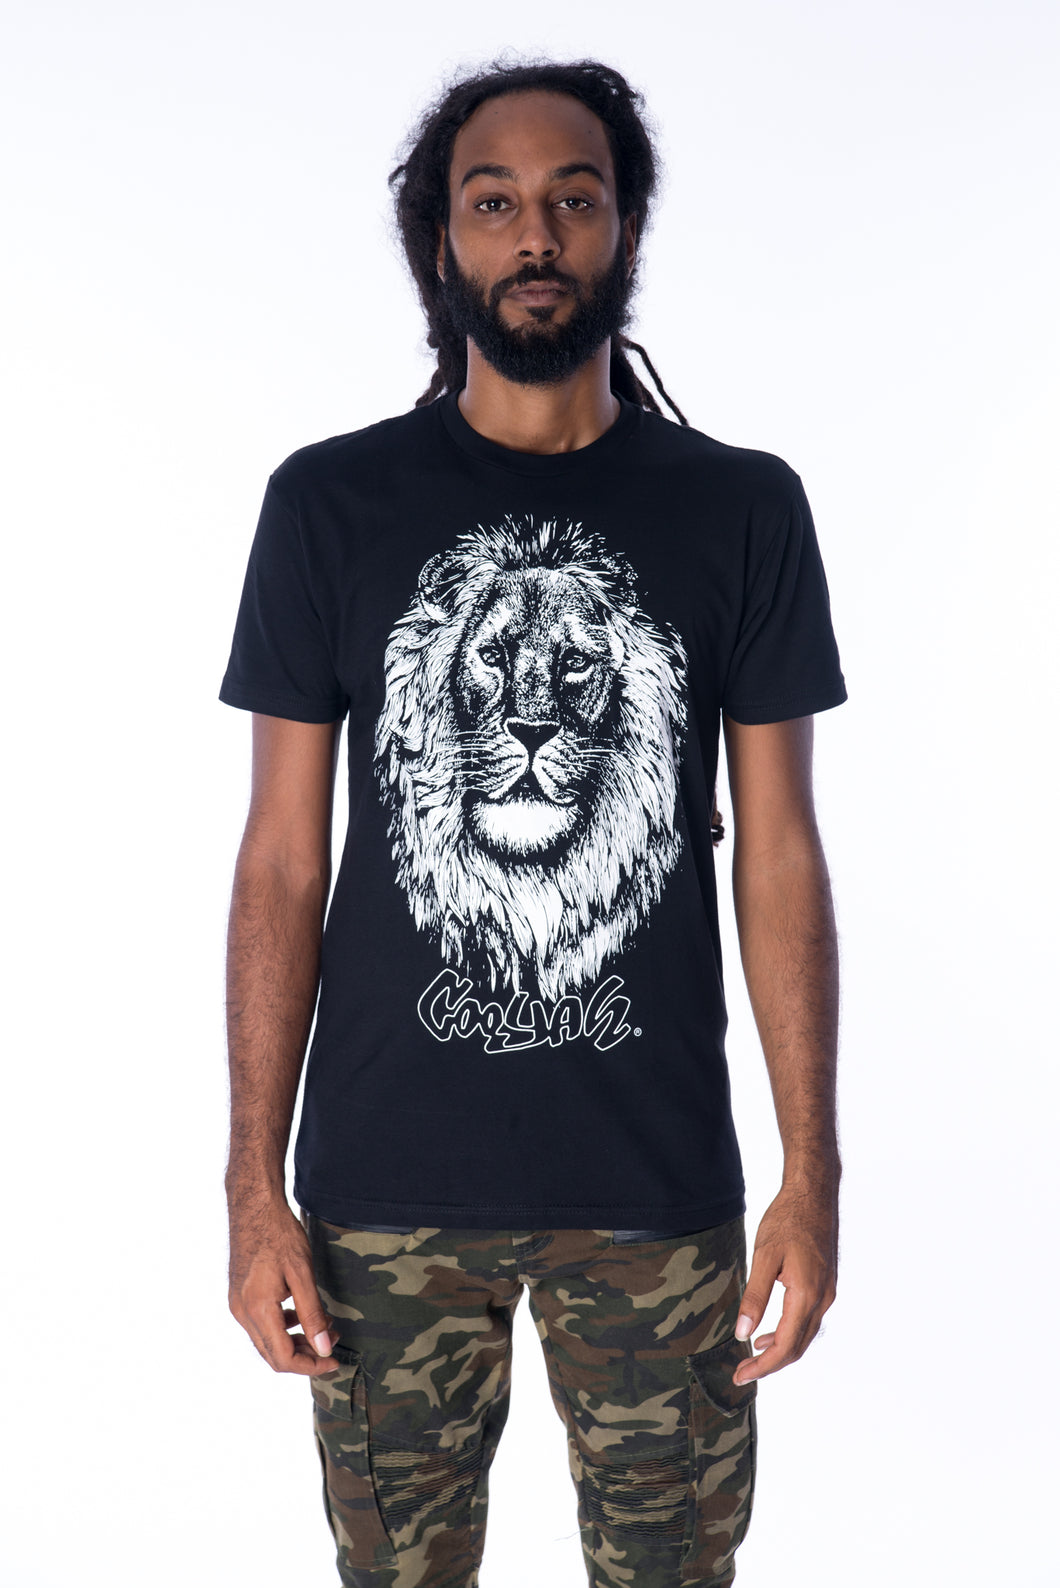 Cooyah Men's Big Face Lion Graphic Tee screen printed on a soft, 100% ringspun cotton black crew-neck t-shirt.  Jamaican owned reggae clothing brand since 1987.  IRIE